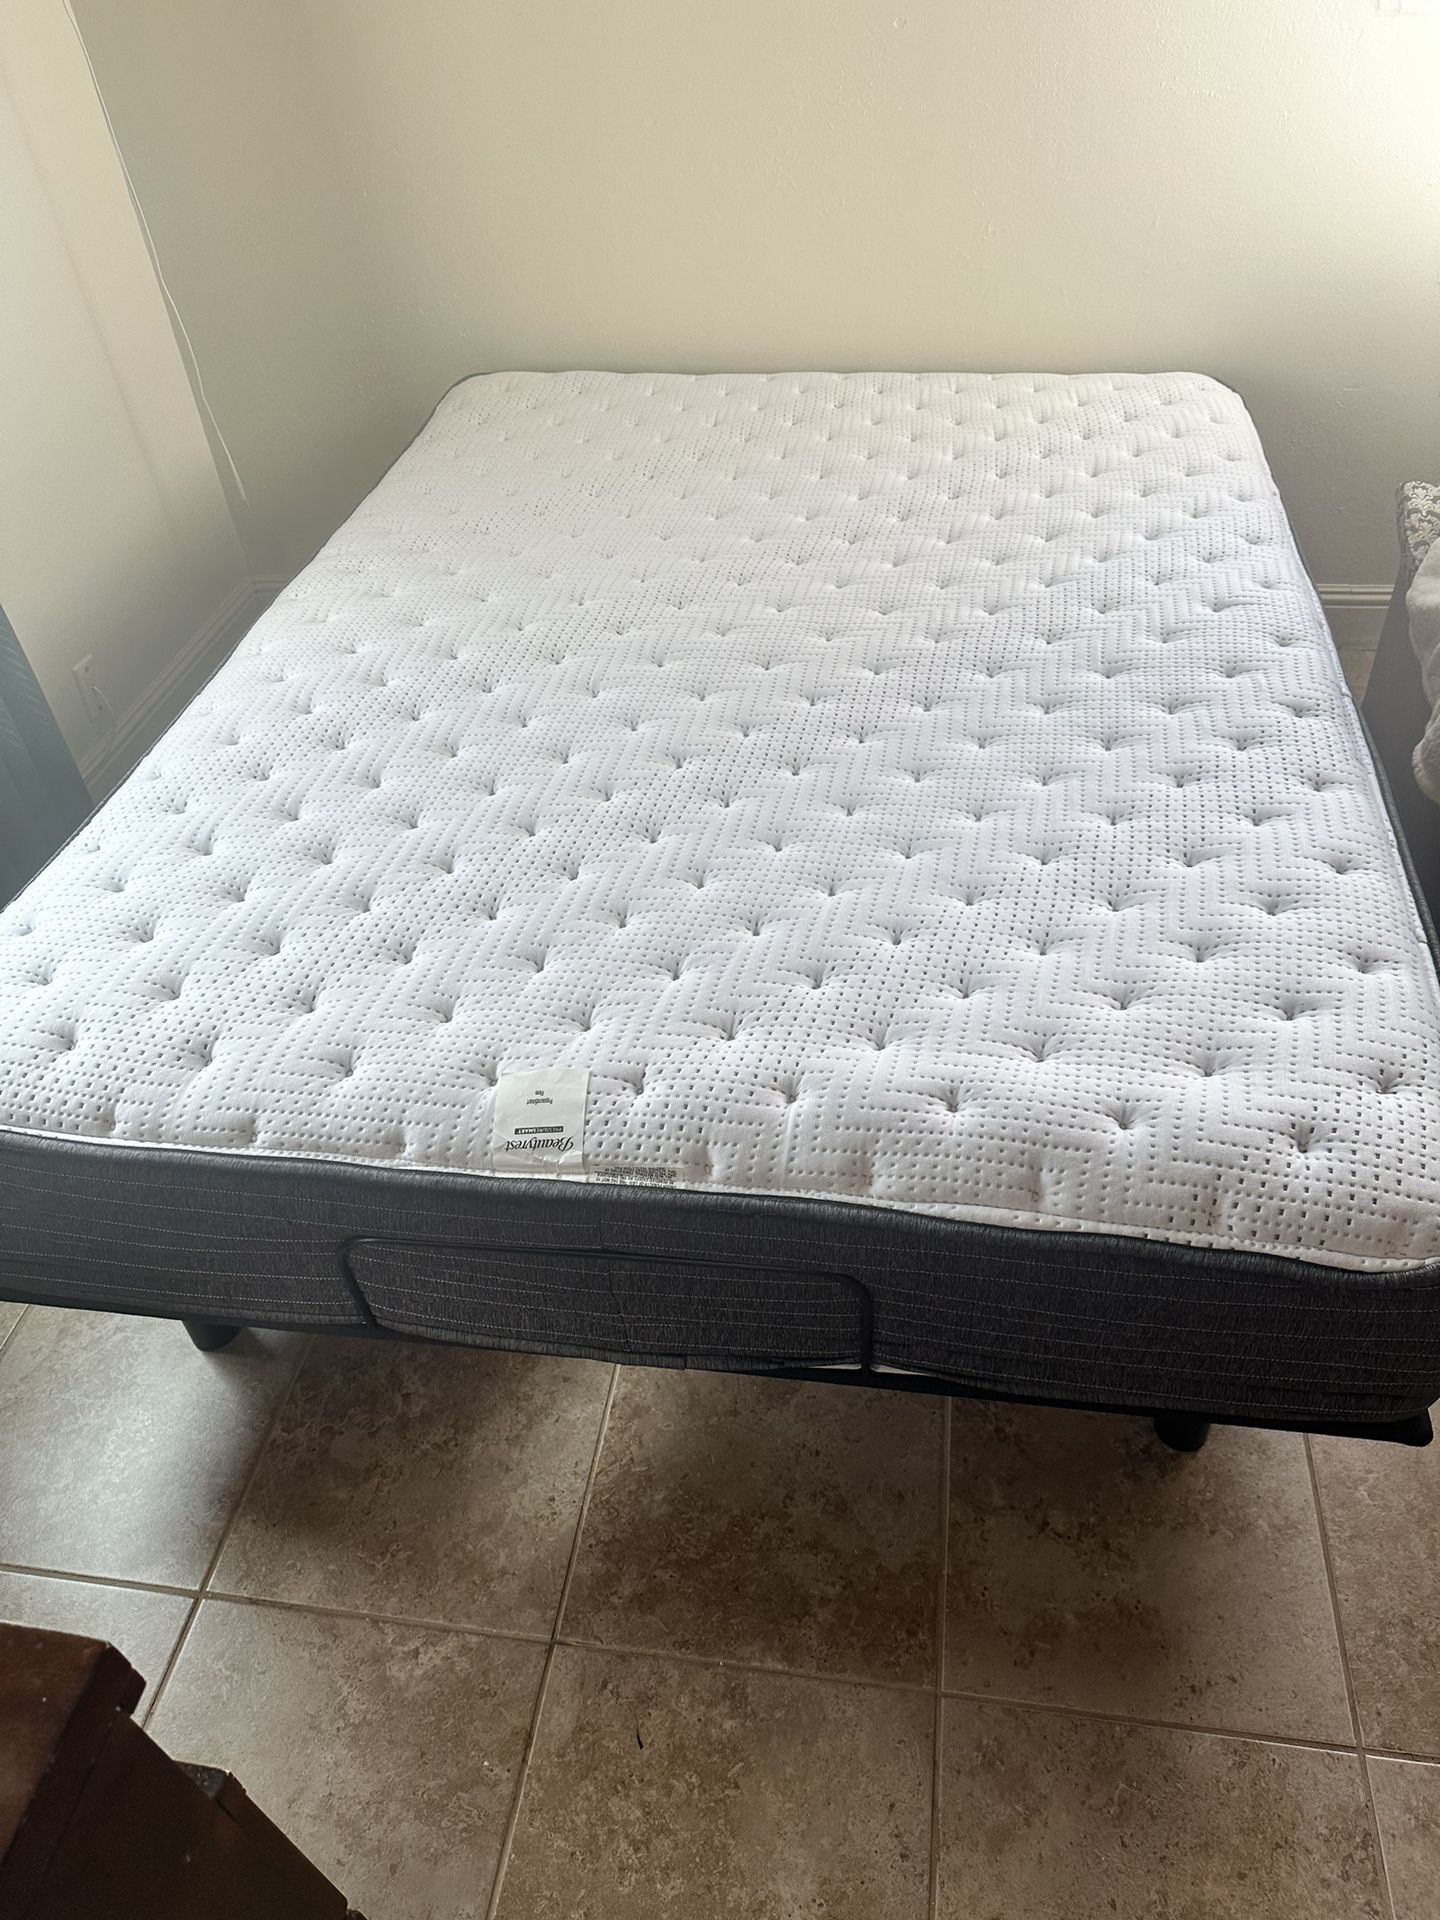 Beautyrest Pressure smart Queen size mattress With reclining Auto bed frame.